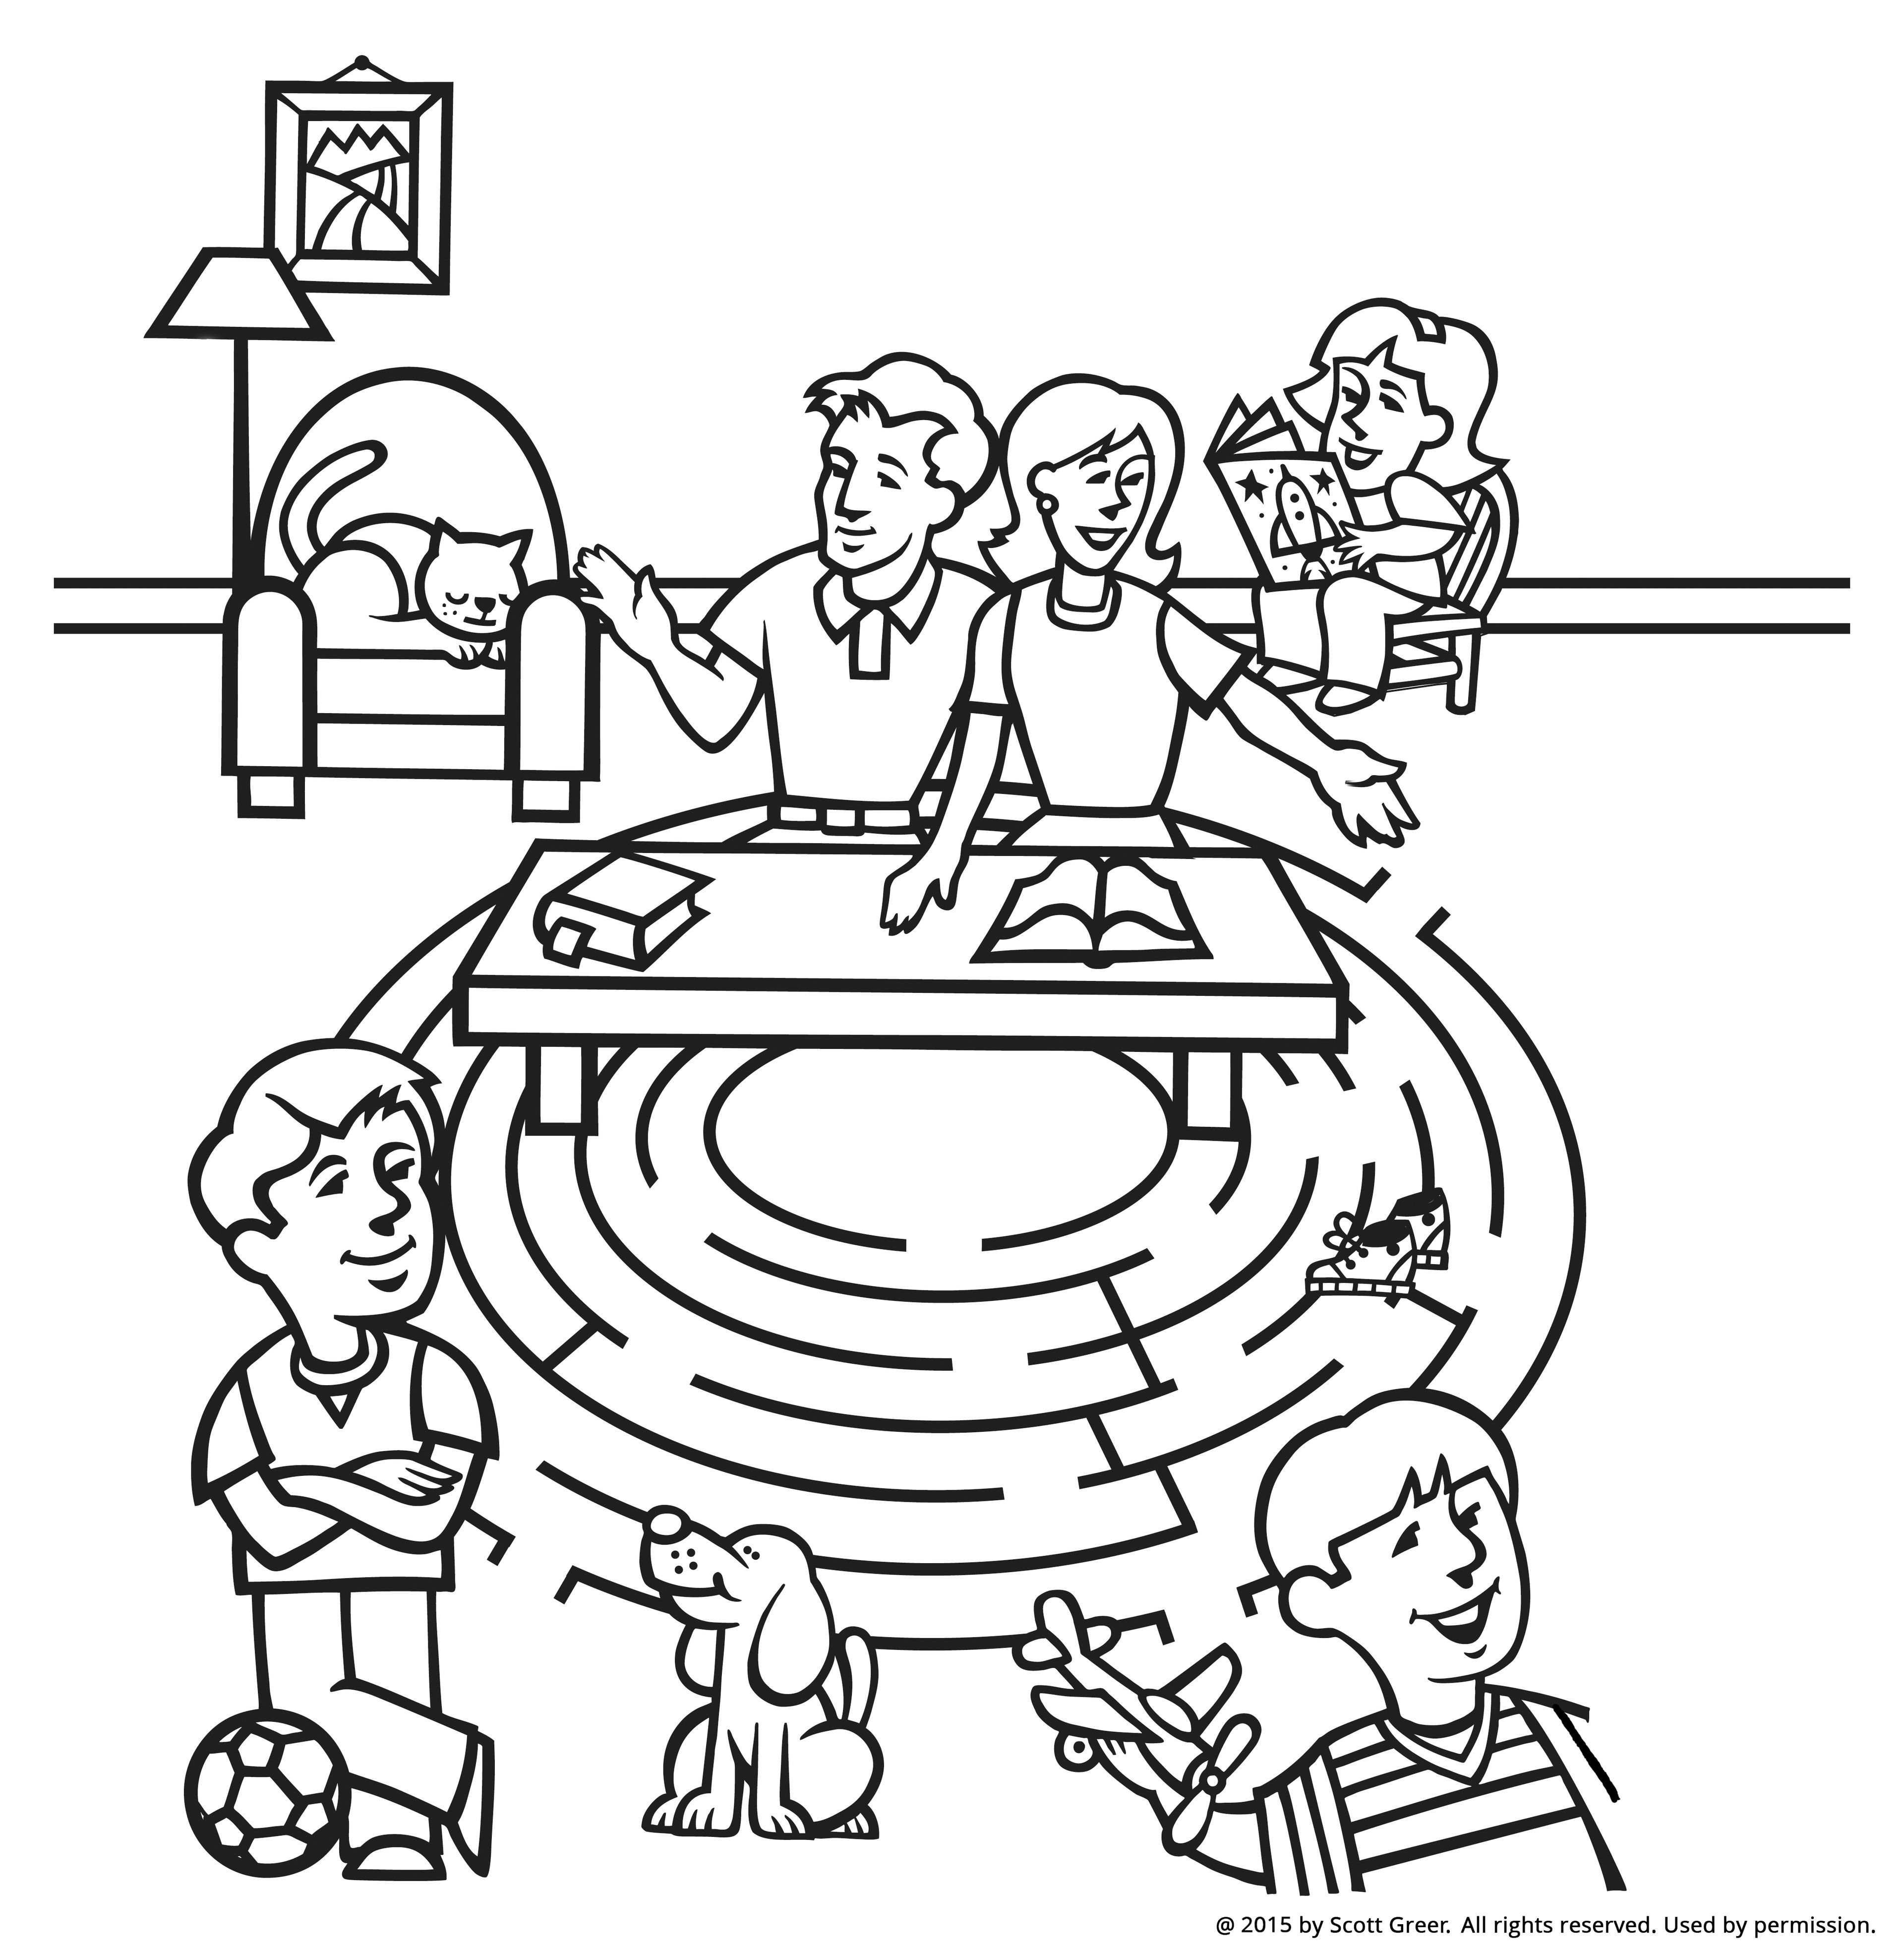 A maze leading to family members, each involved in different activities.